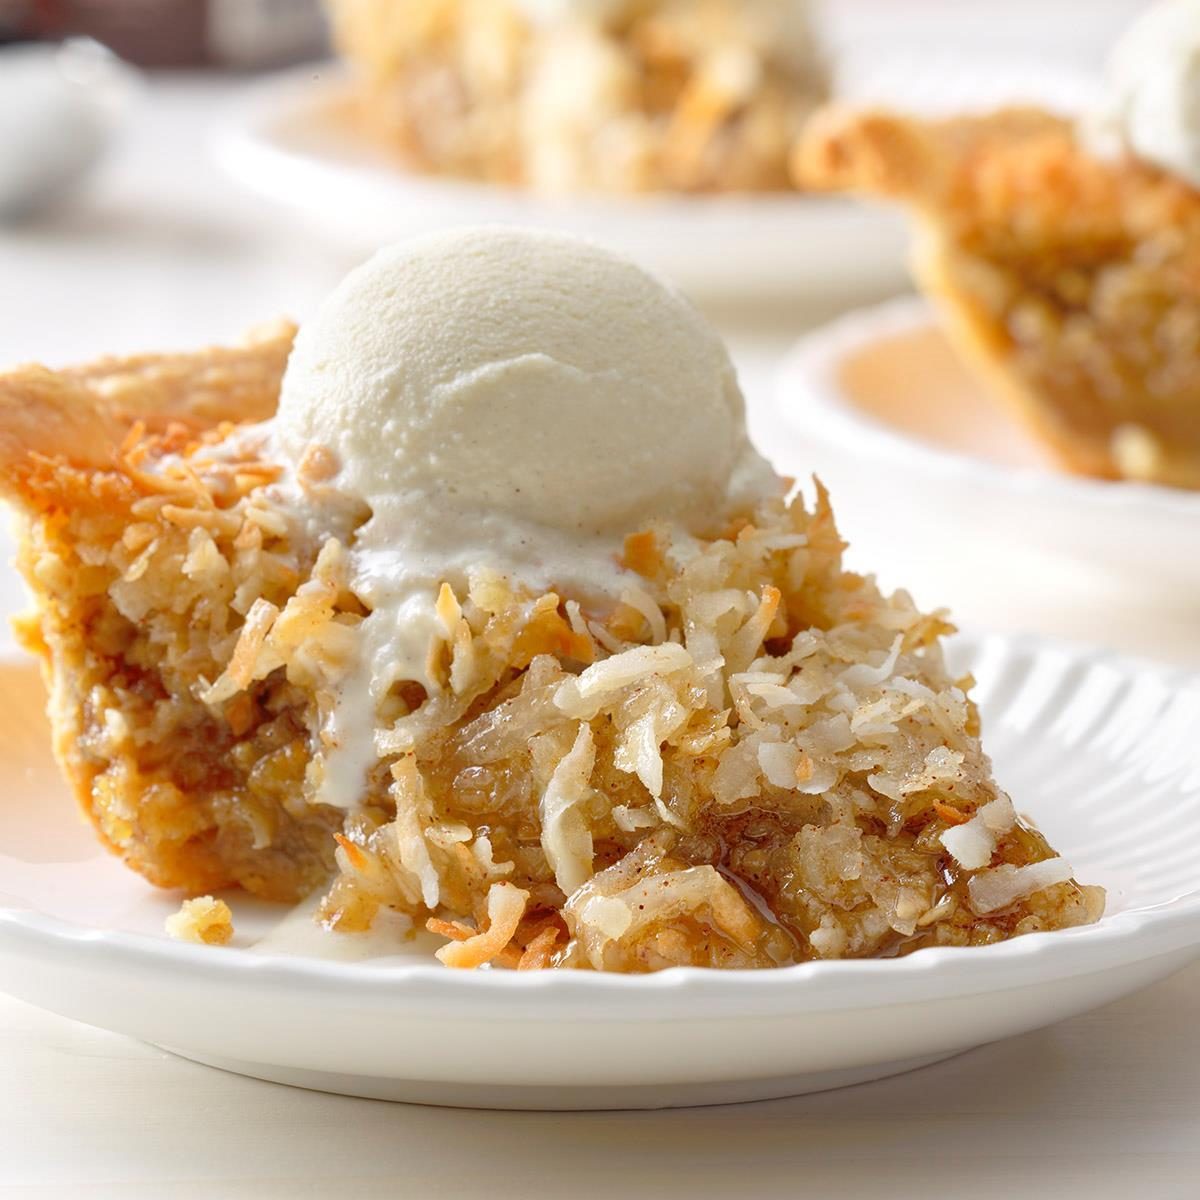 Vermont Maple Oatmeal Pie Exps Ppp18 45764 B05 16 4b 13